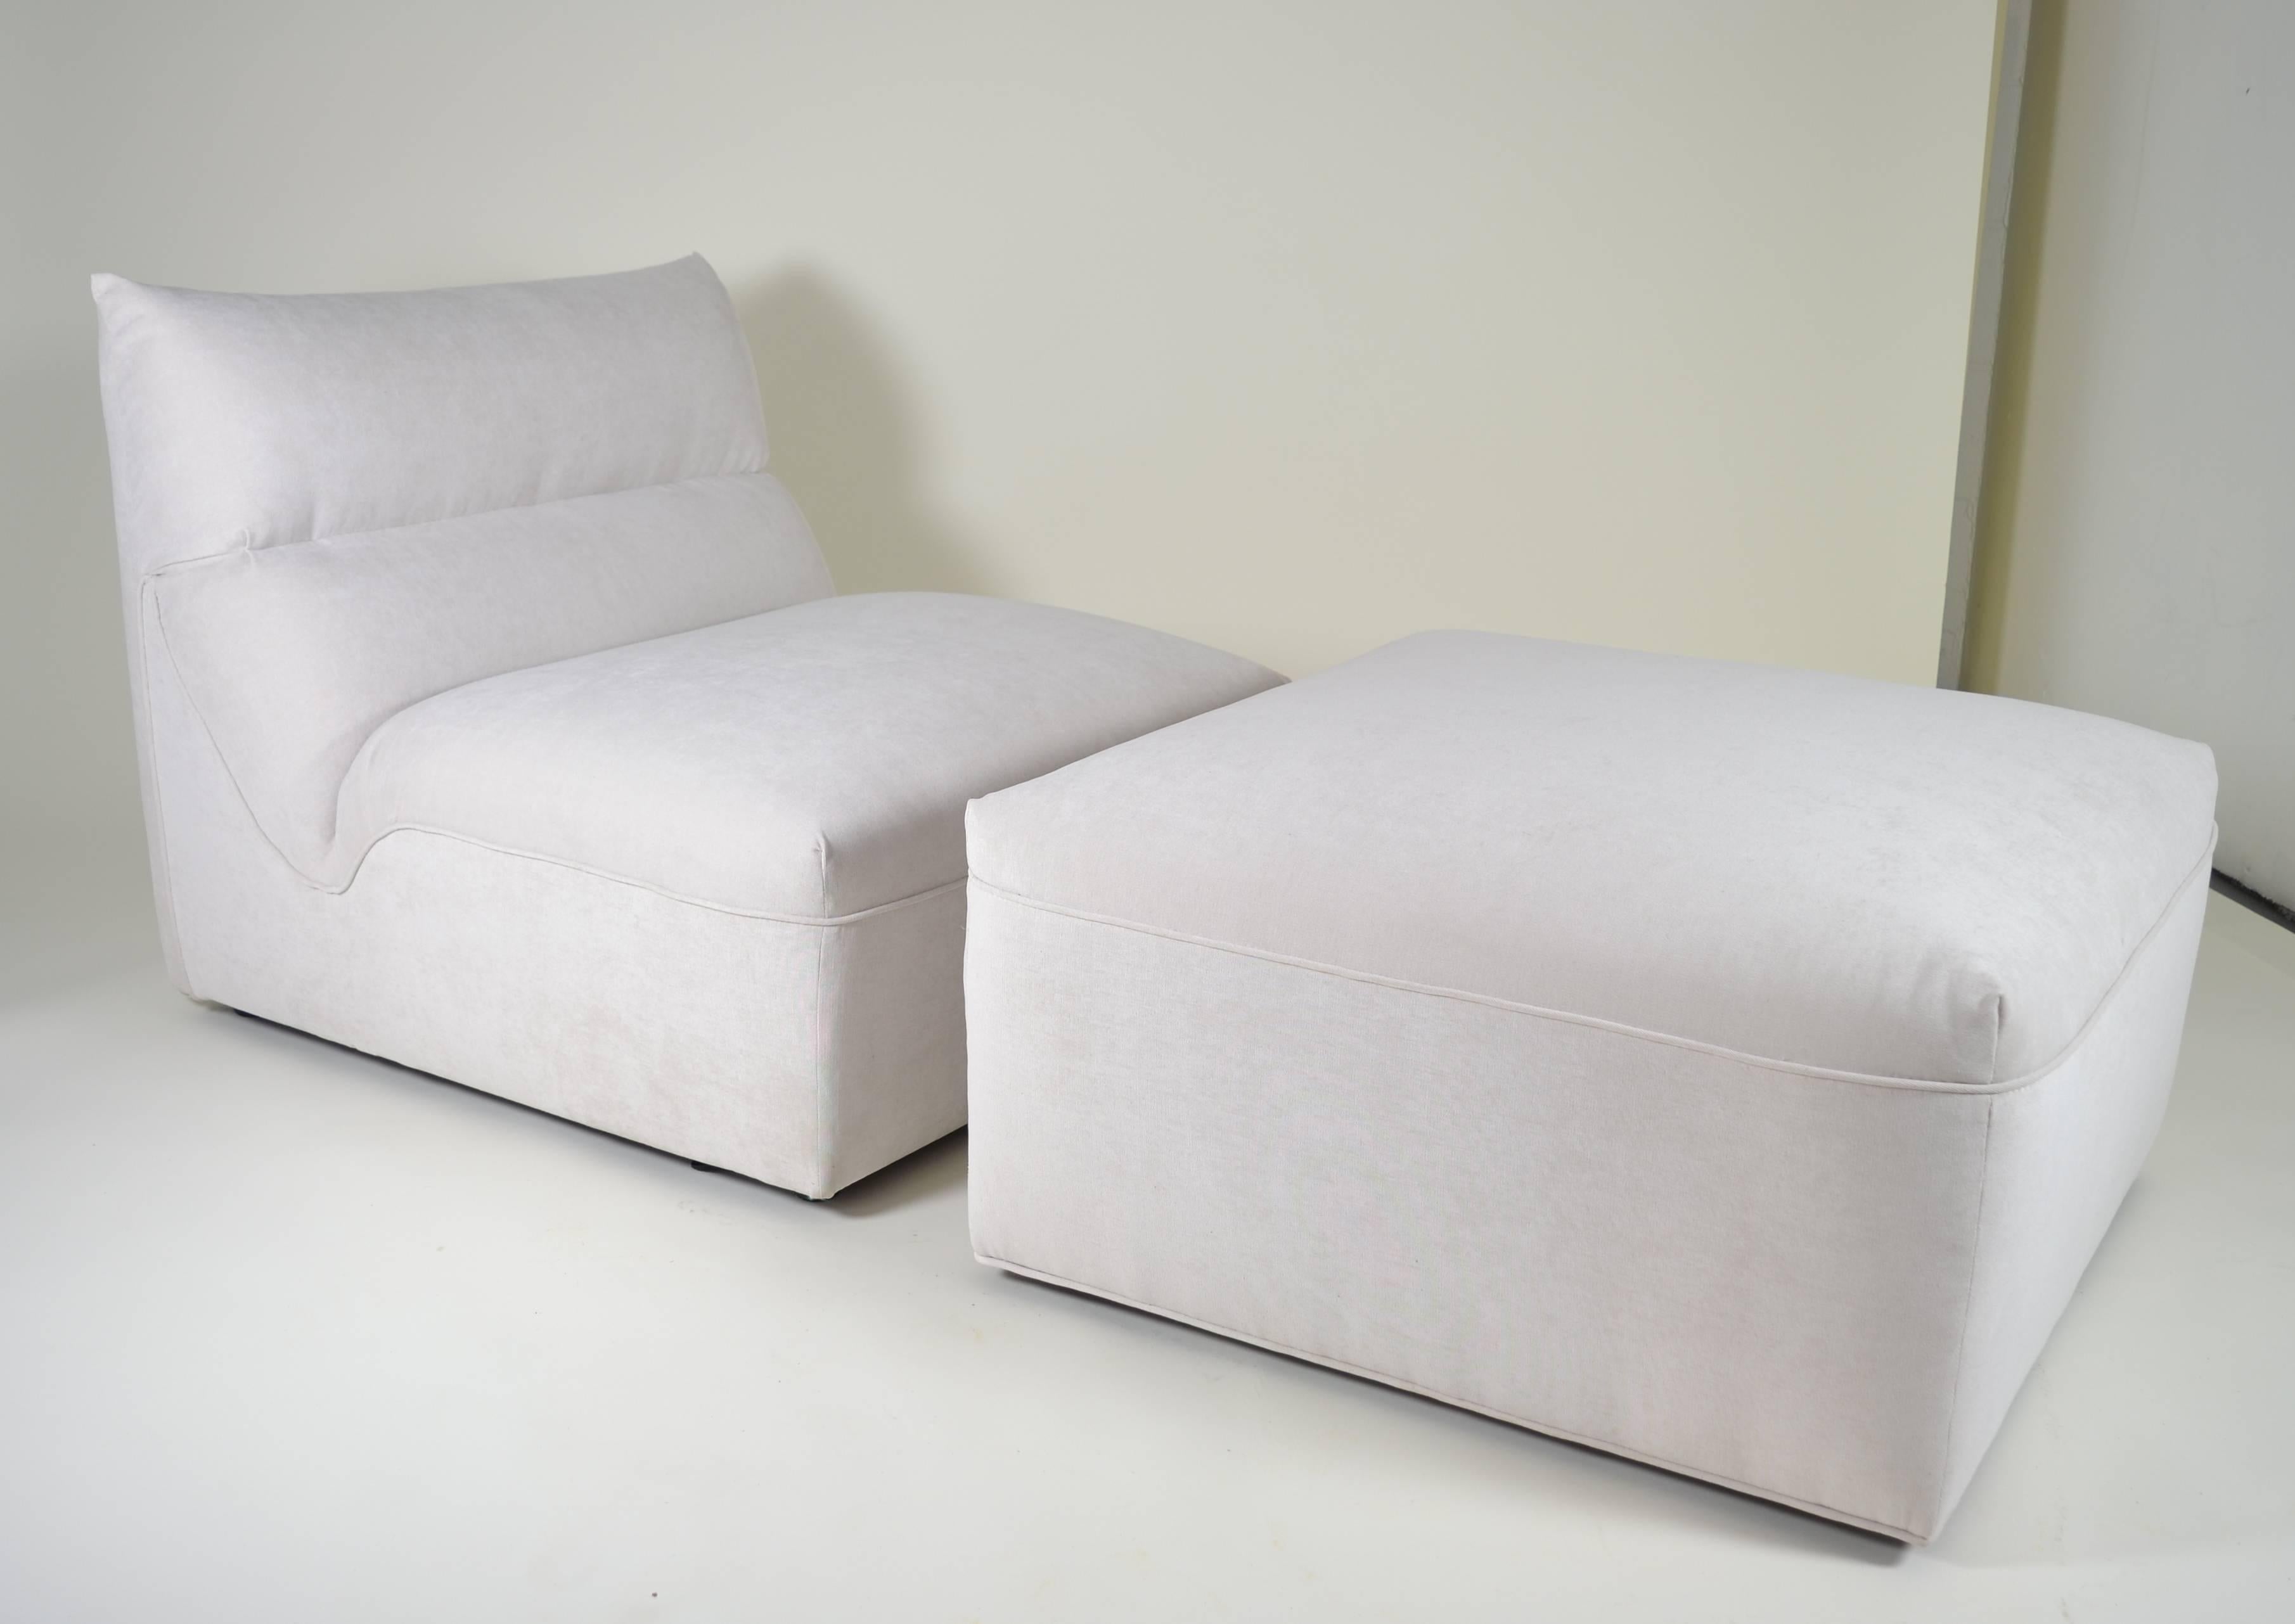 Designed by Guido Falescyhini; manufactured by i4 Mariani for Pace Collection. Large and comfortable and super stylish lounge chair and matching ottoman. Newly upholstered in very low nap off-white velvet. Excellent condition. Chair measures: Width